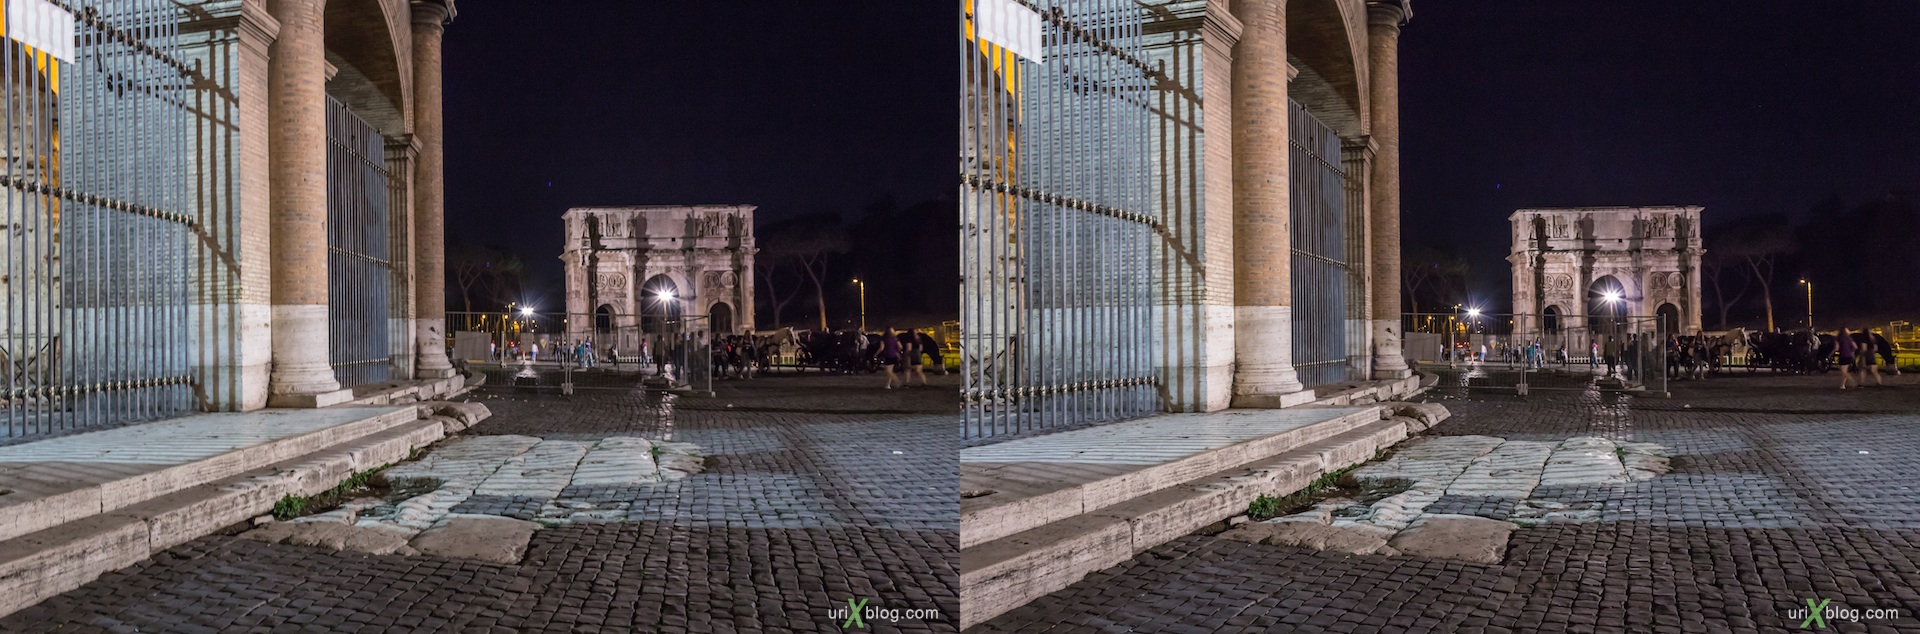 2012, Colosseum, Coliseum, Flavian Amphitheatre, Arch of Constantine, Rome, Italy, night, 3D, stereo pair, cross-eyed, crossview, cross view stereo pair